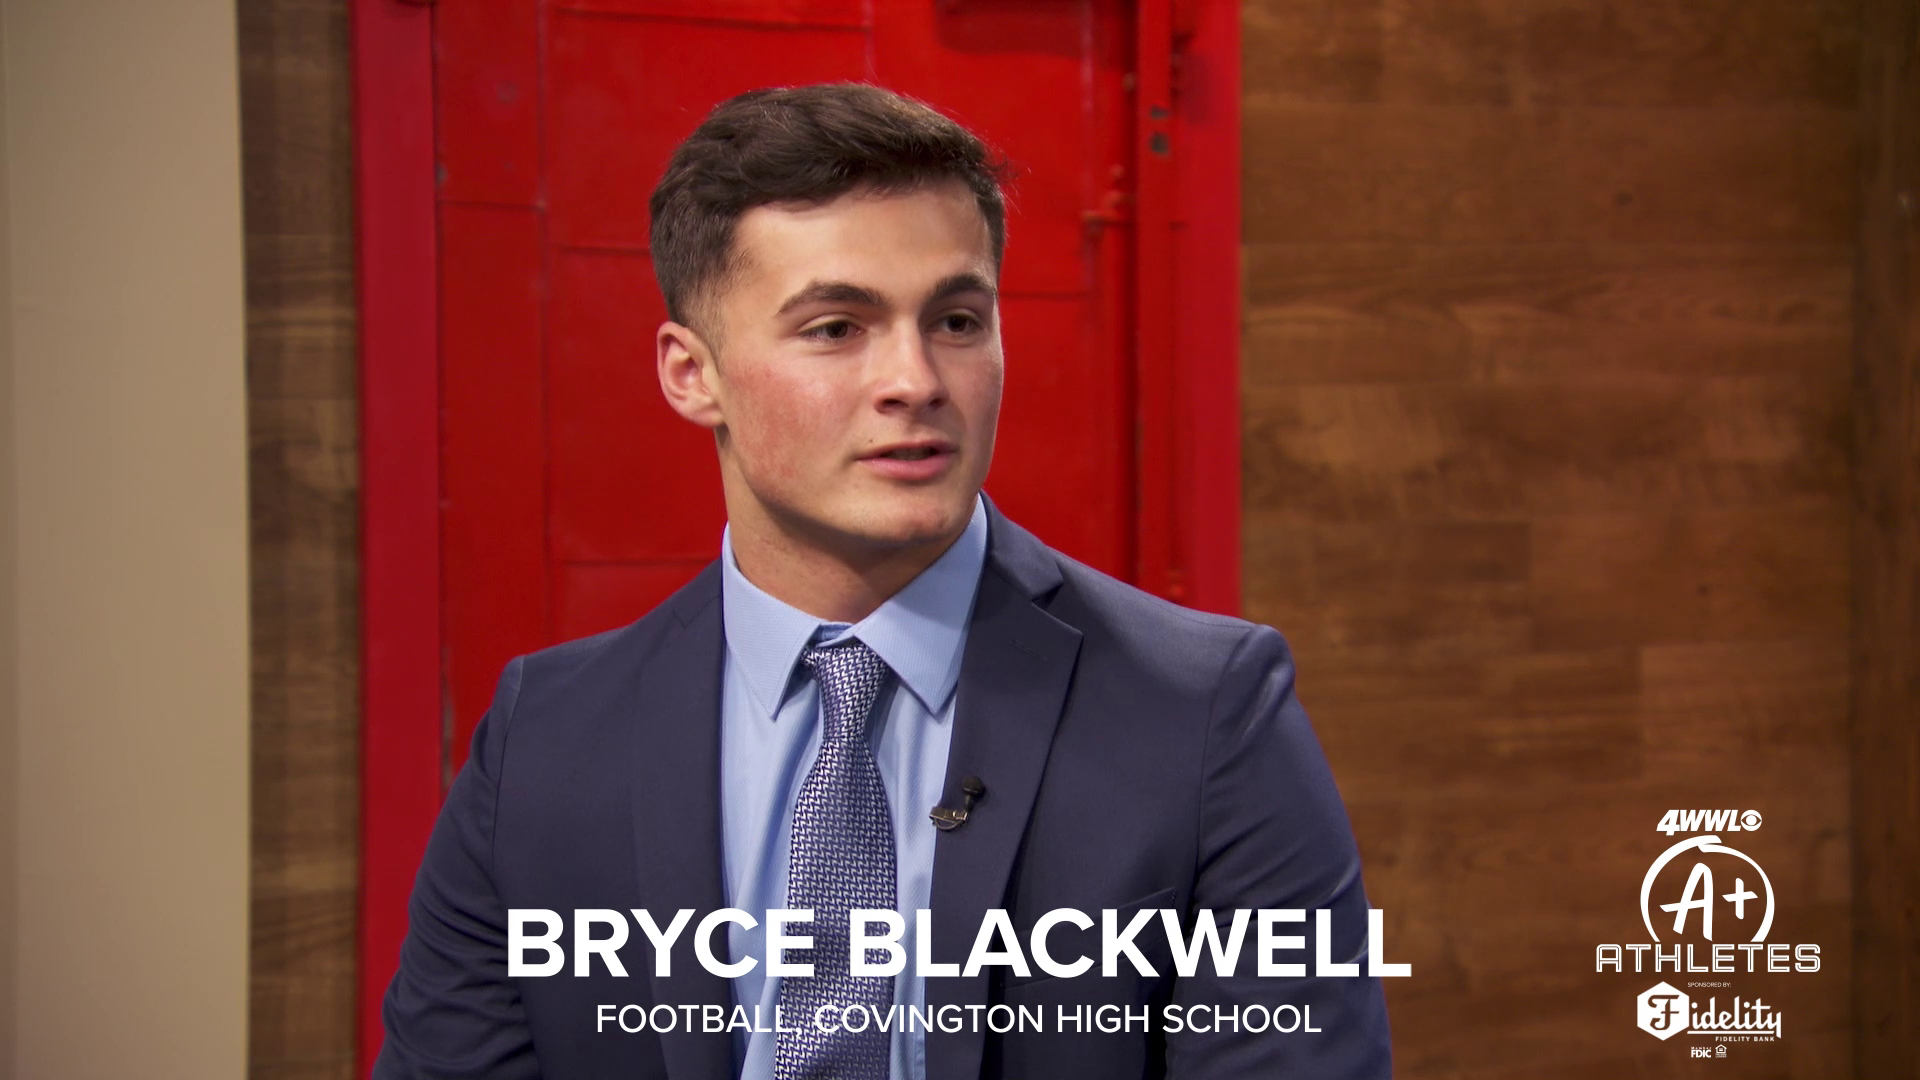 WWL-TV is honoring athletes who excel on and off the field, like Covington High School's Bryce Blackwell.